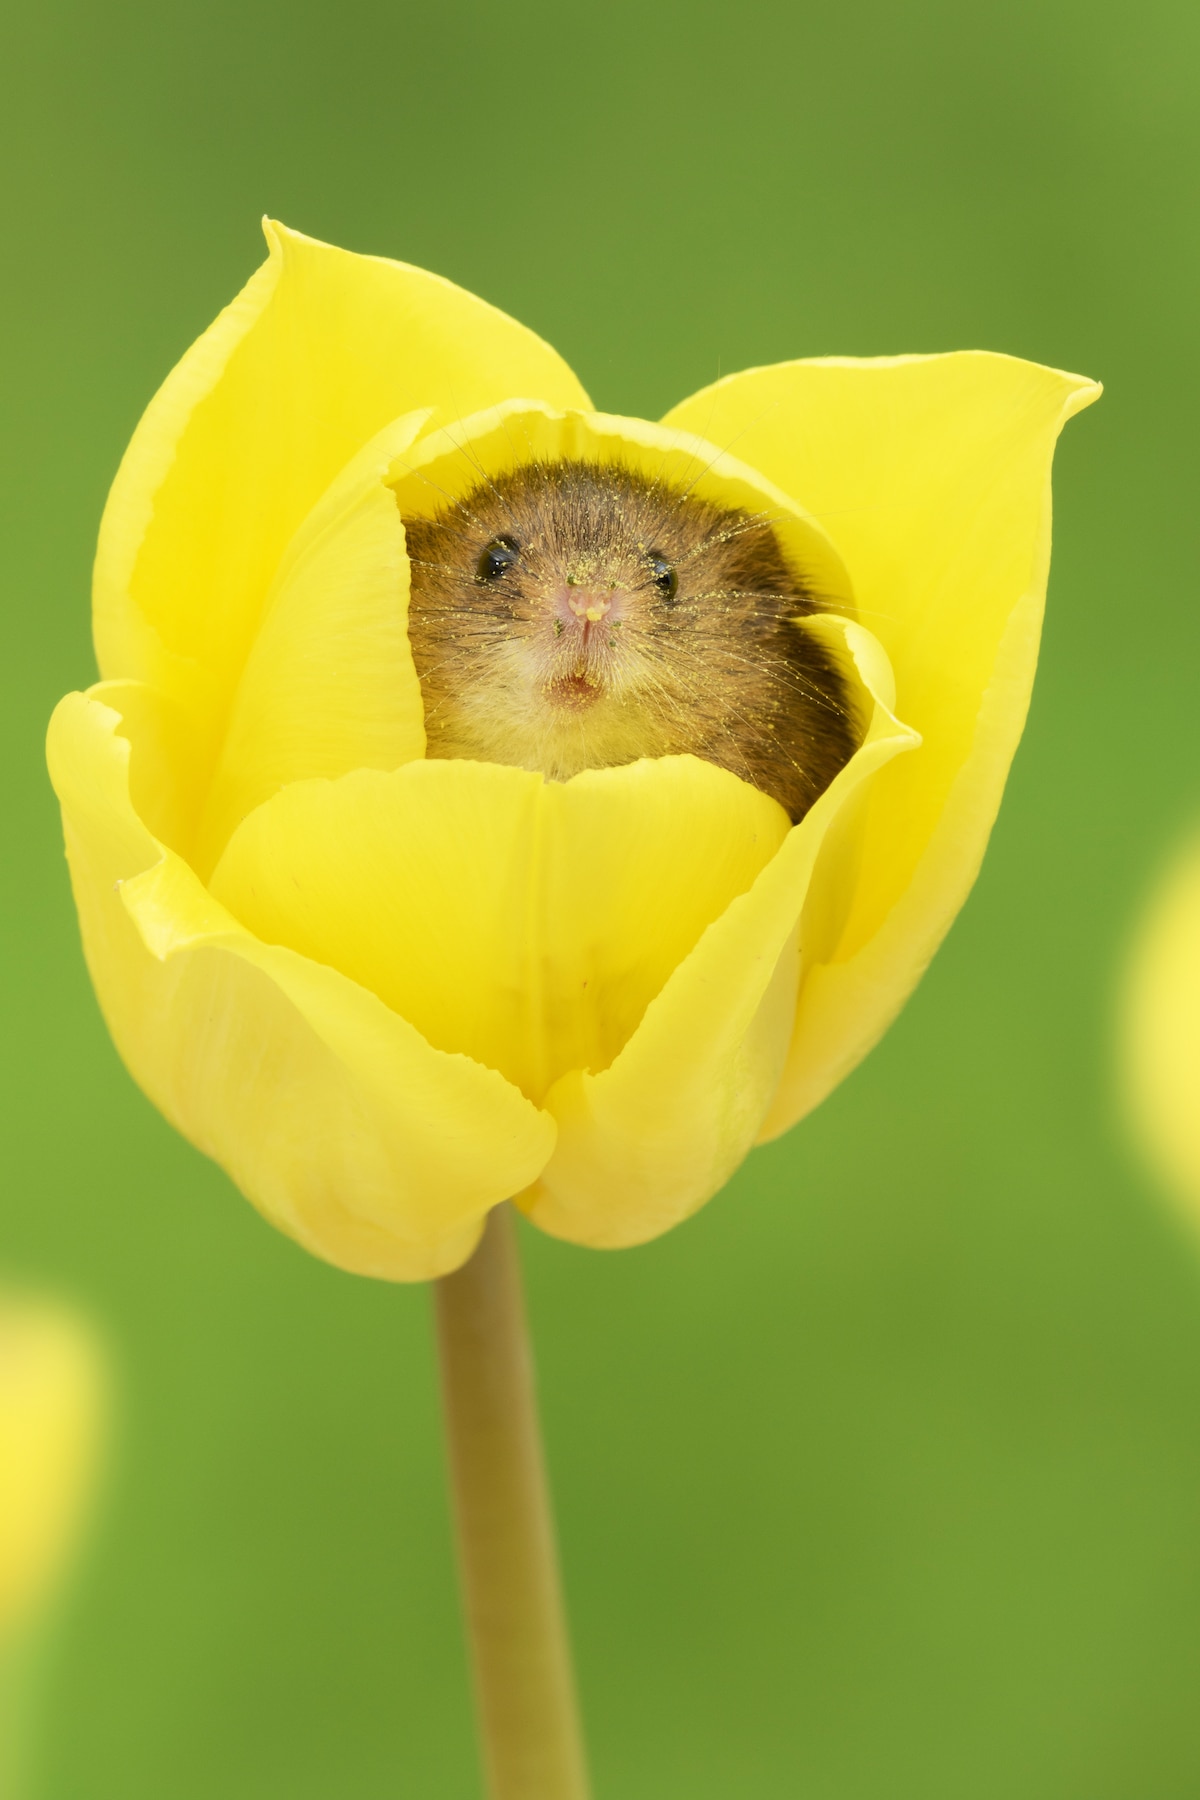 Cute Mouse in a Flower